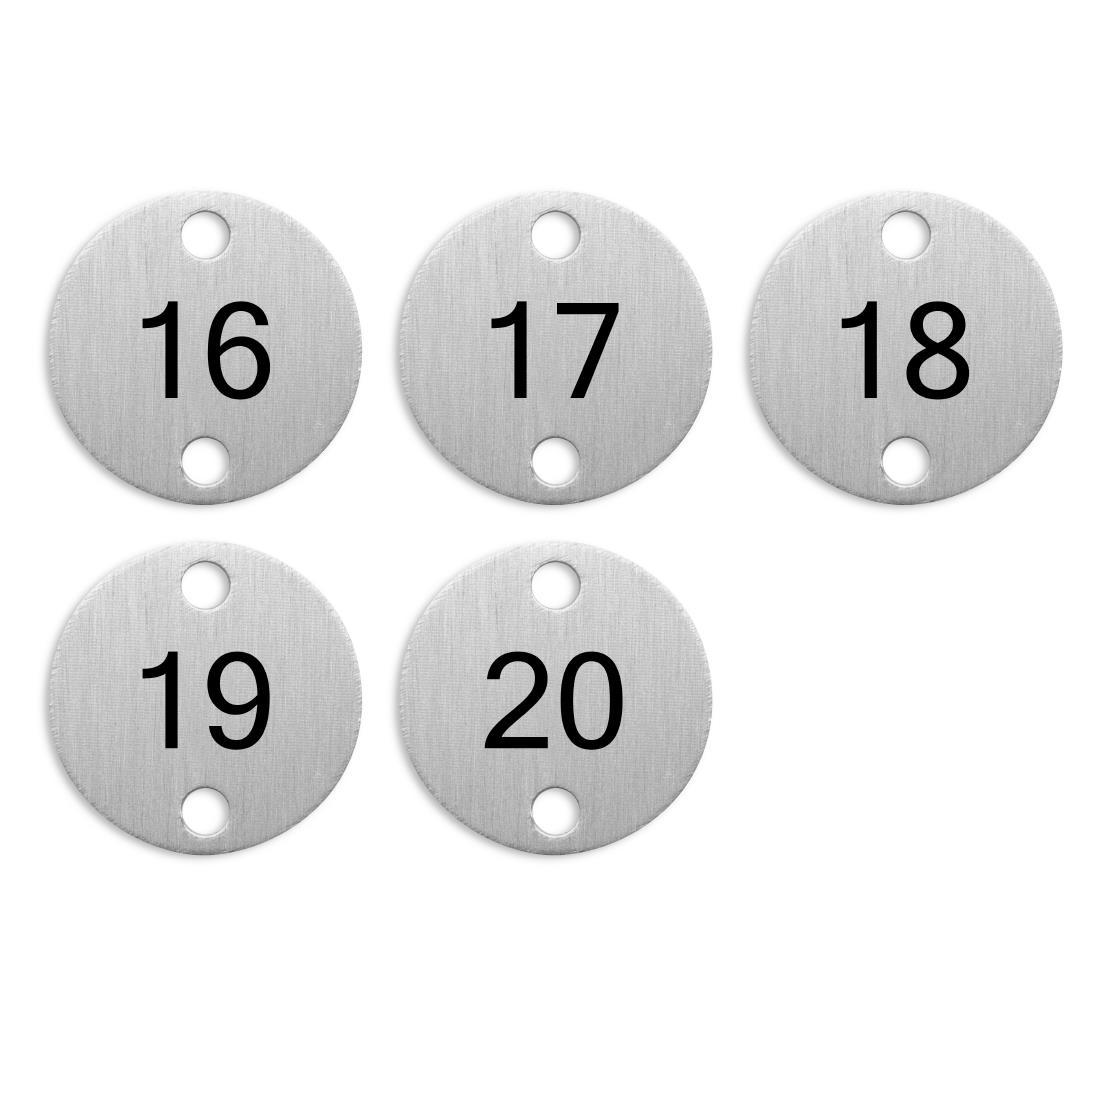 Bolero Table Numbers Silver (16-20) - DY773  - 2